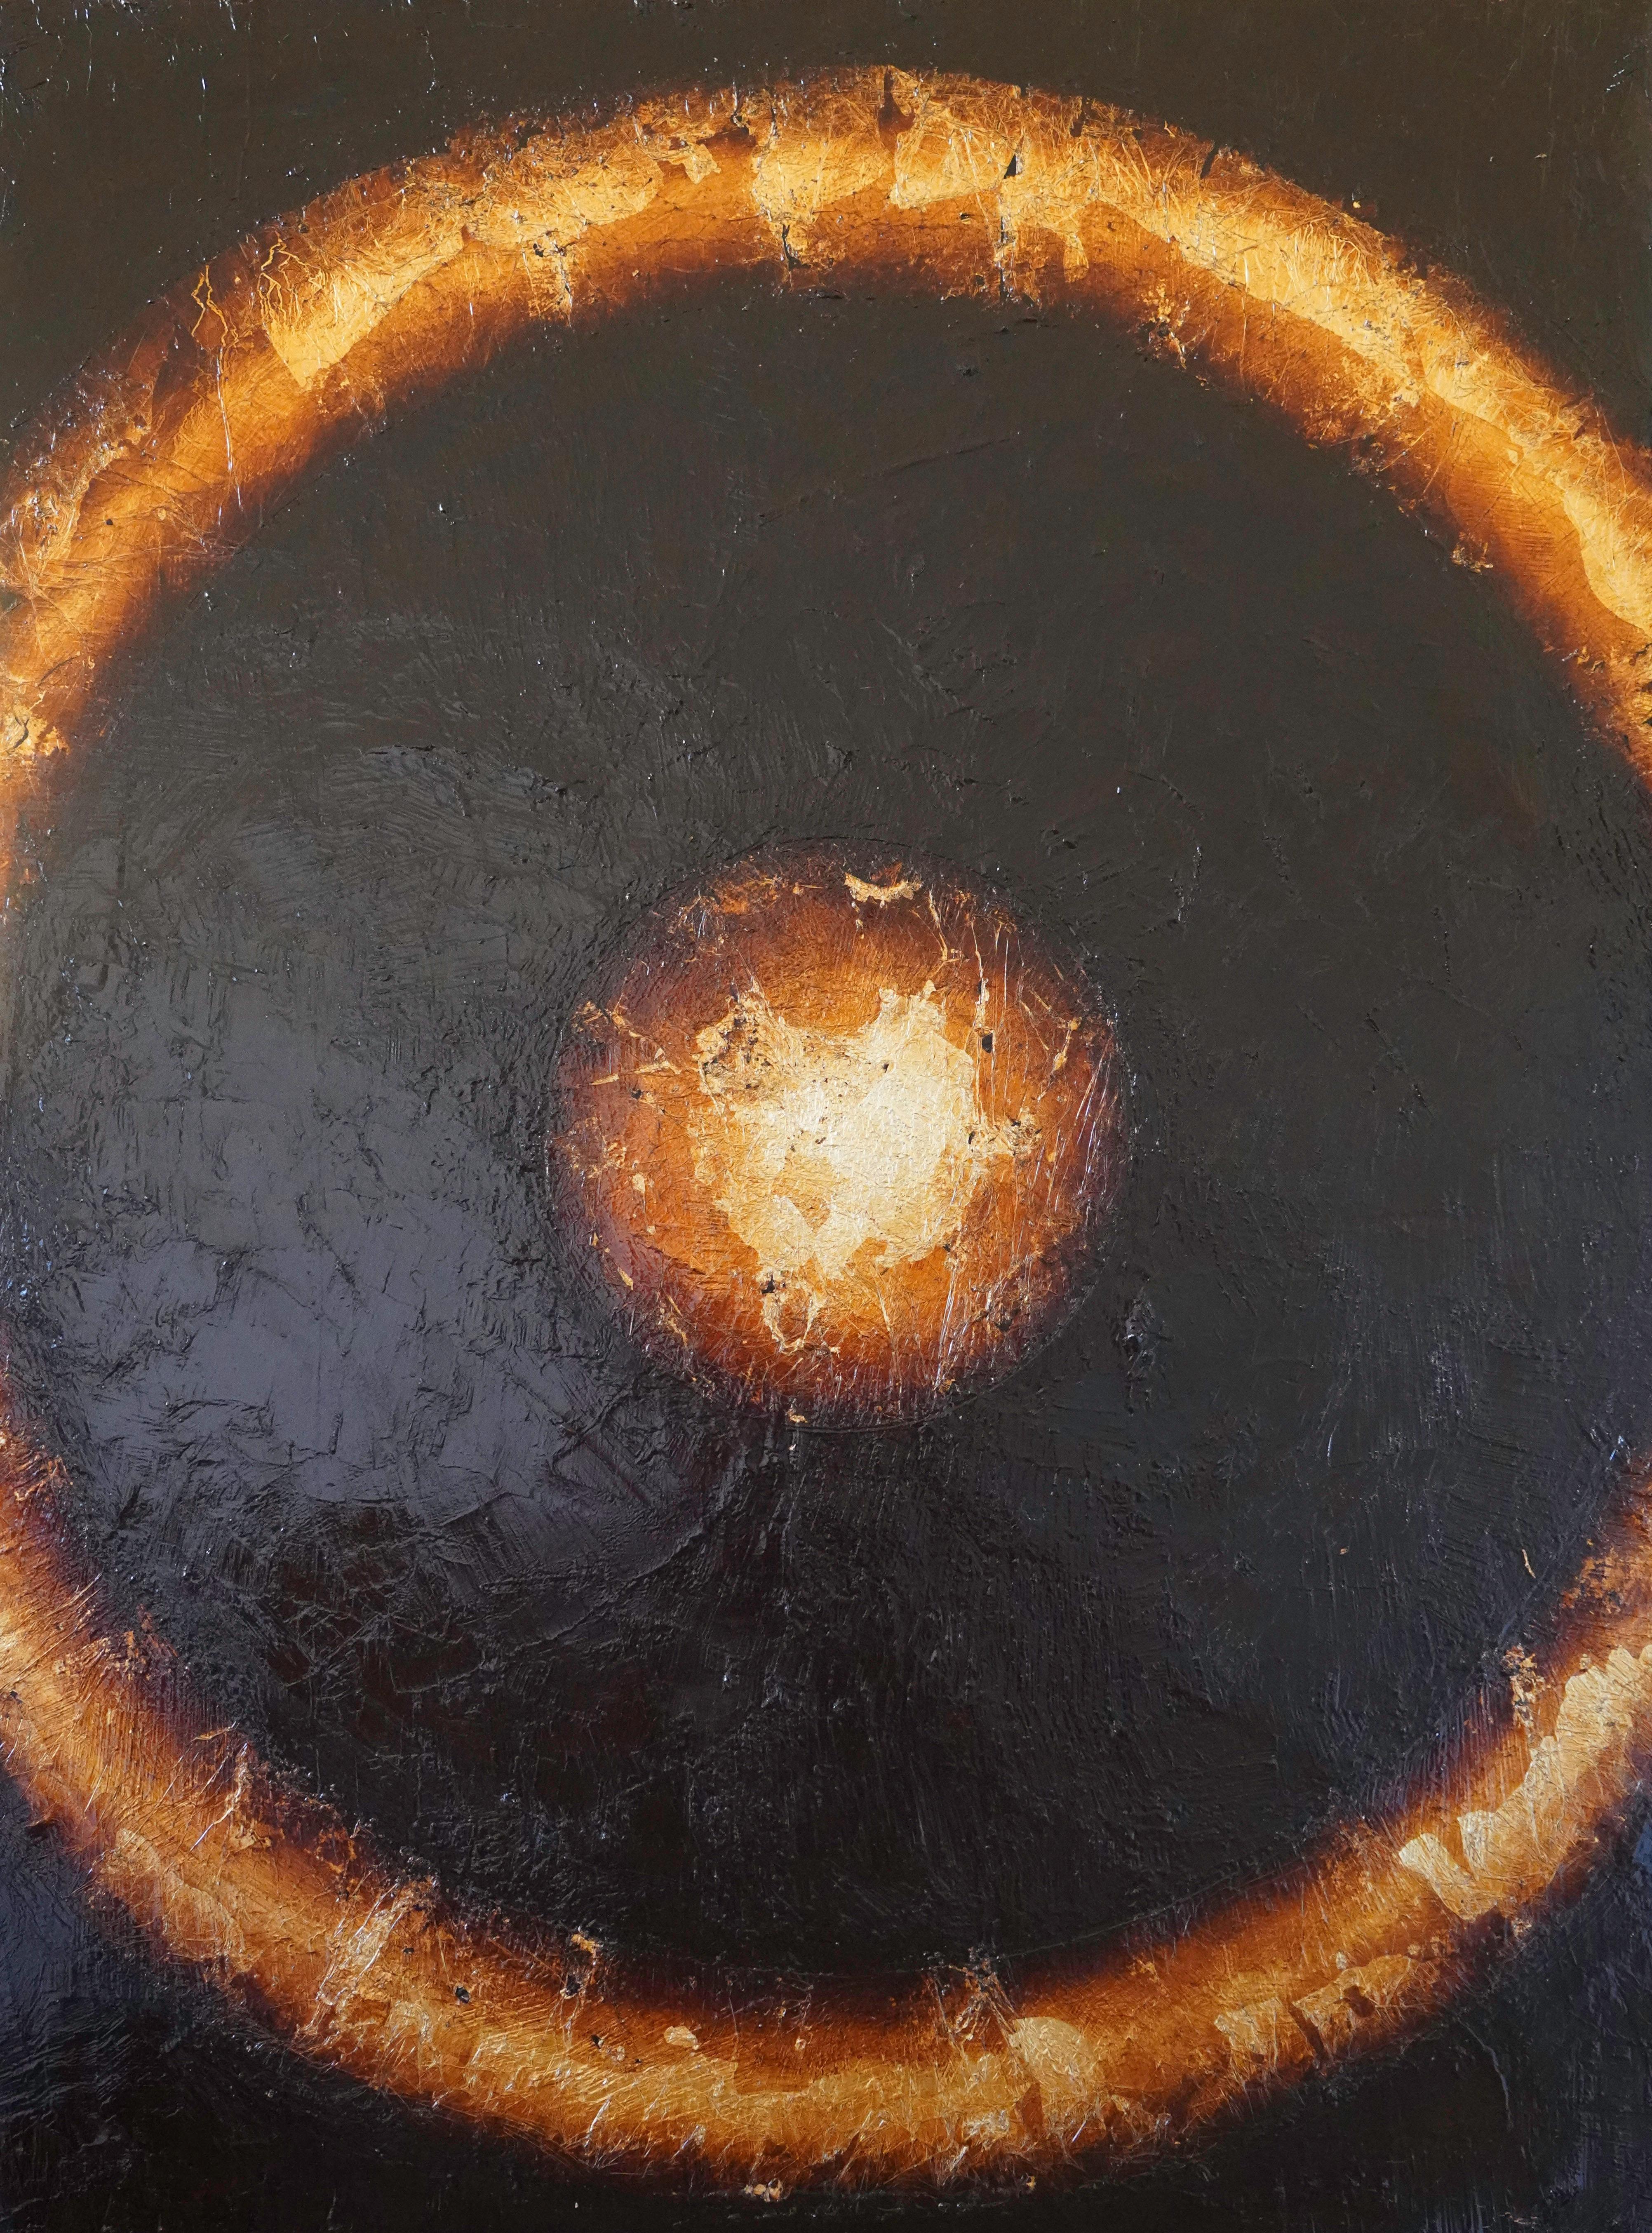 Oil and Gold Leaf on Canvas

“Everyone who has drawn a circle knows that this center point must exist for its' construction. This middle point stands for centralized power, the base or heart of all energy. In a transferal sense it is God, the cosmic